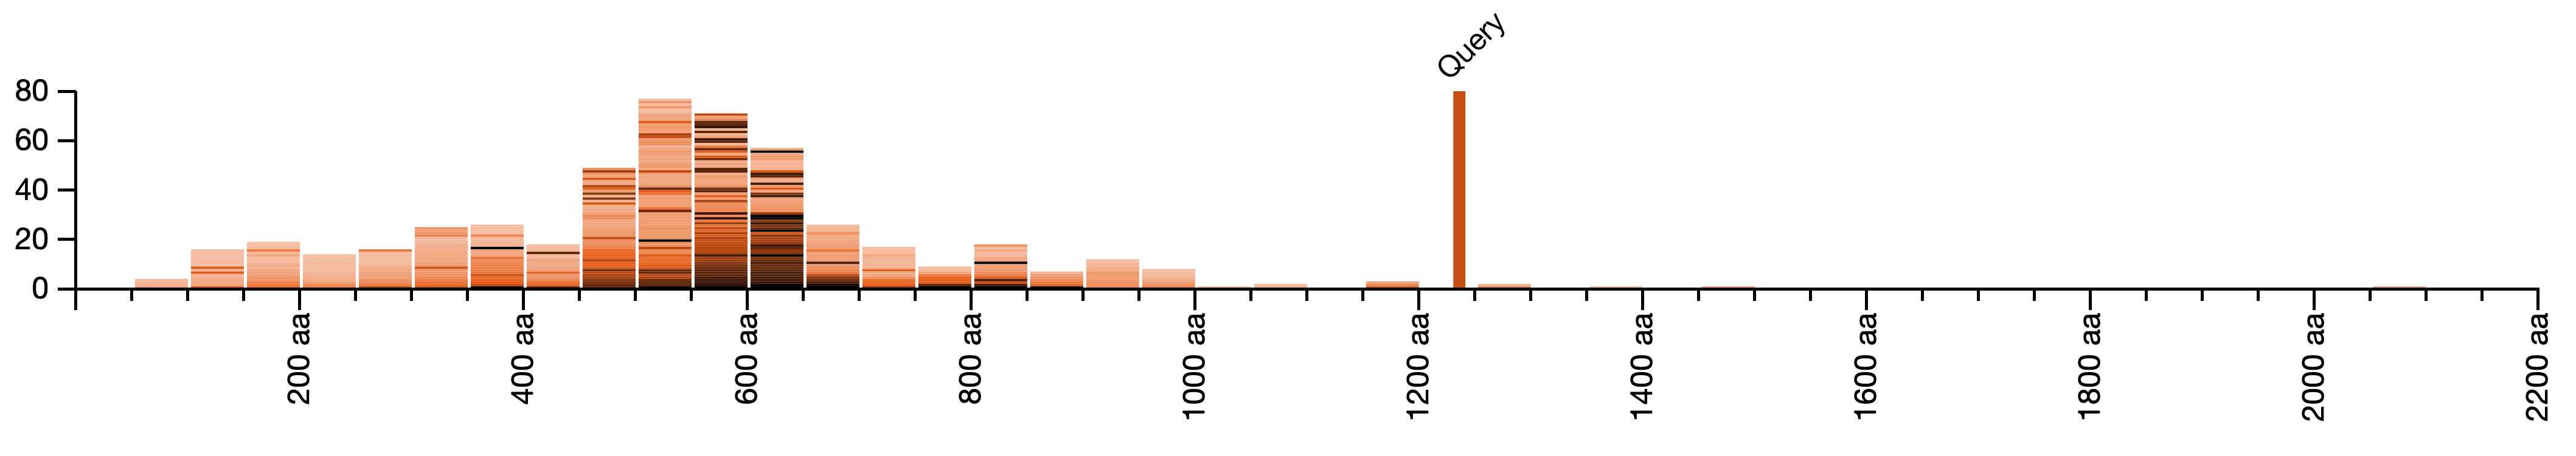 Distribution of lengths of hit sequences compared to the query sequence